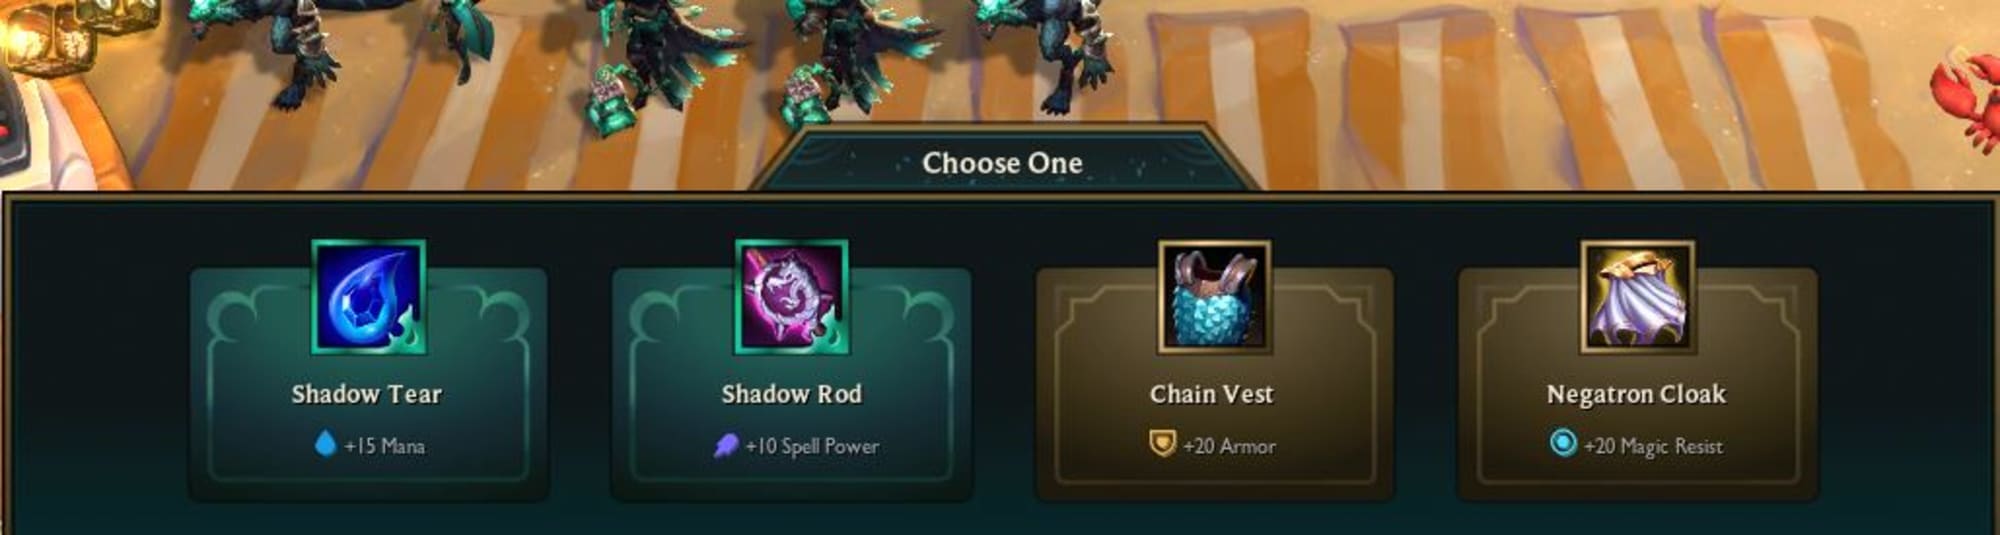 Bogholder Banyan Utallige TFT Guide: Breaking Down Set 5's Shadow Items & How To Use Them